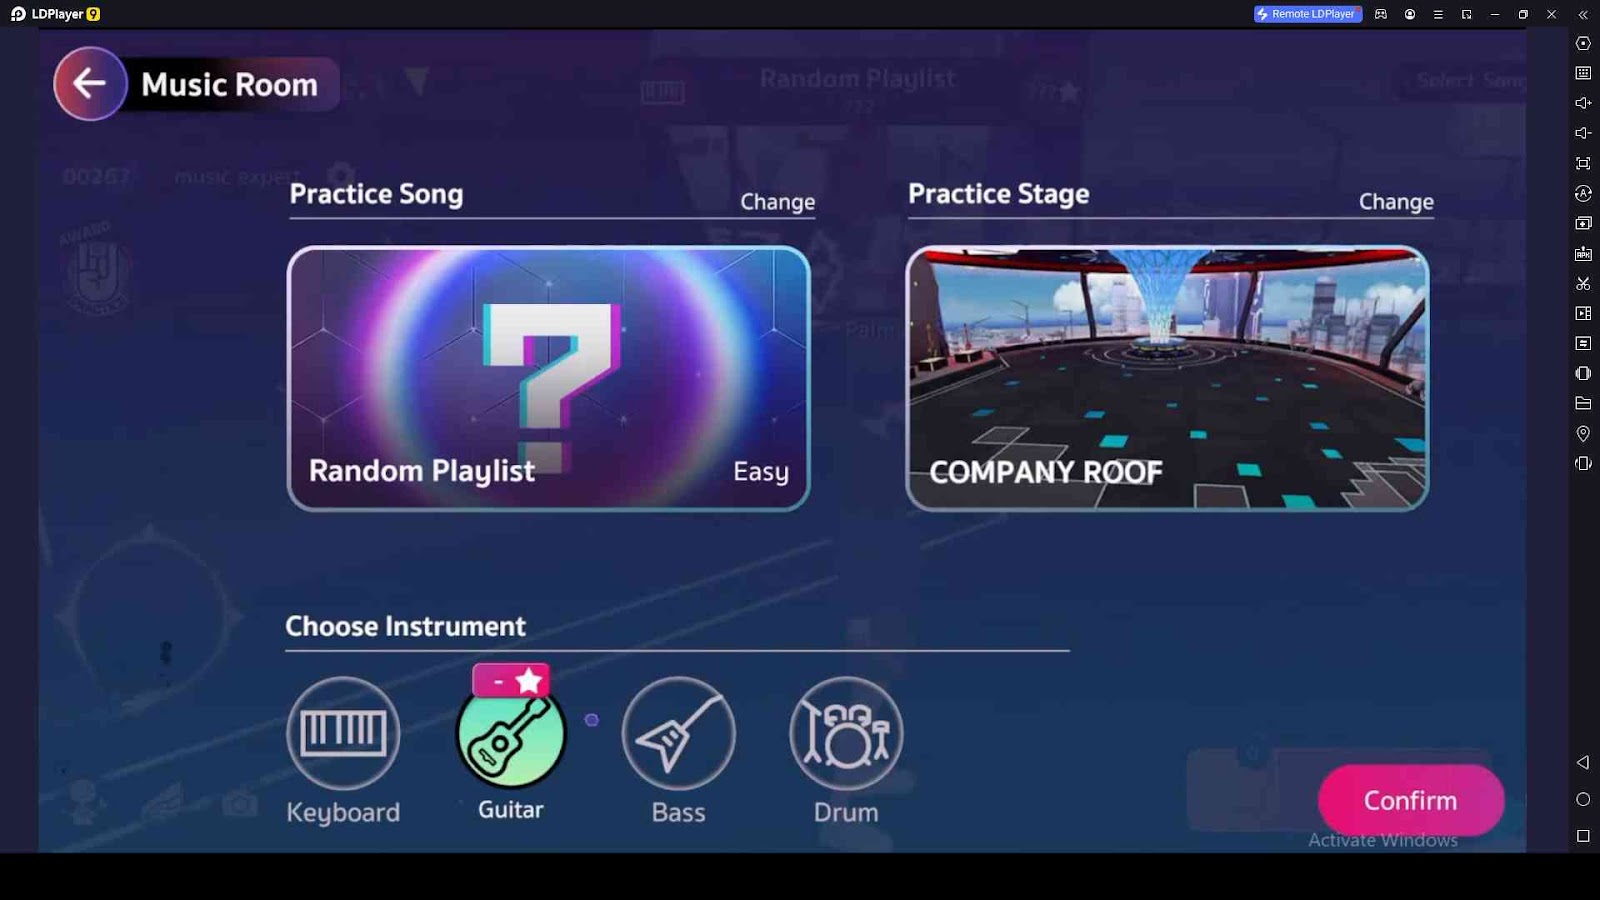 Participate in Music Room Challenges 